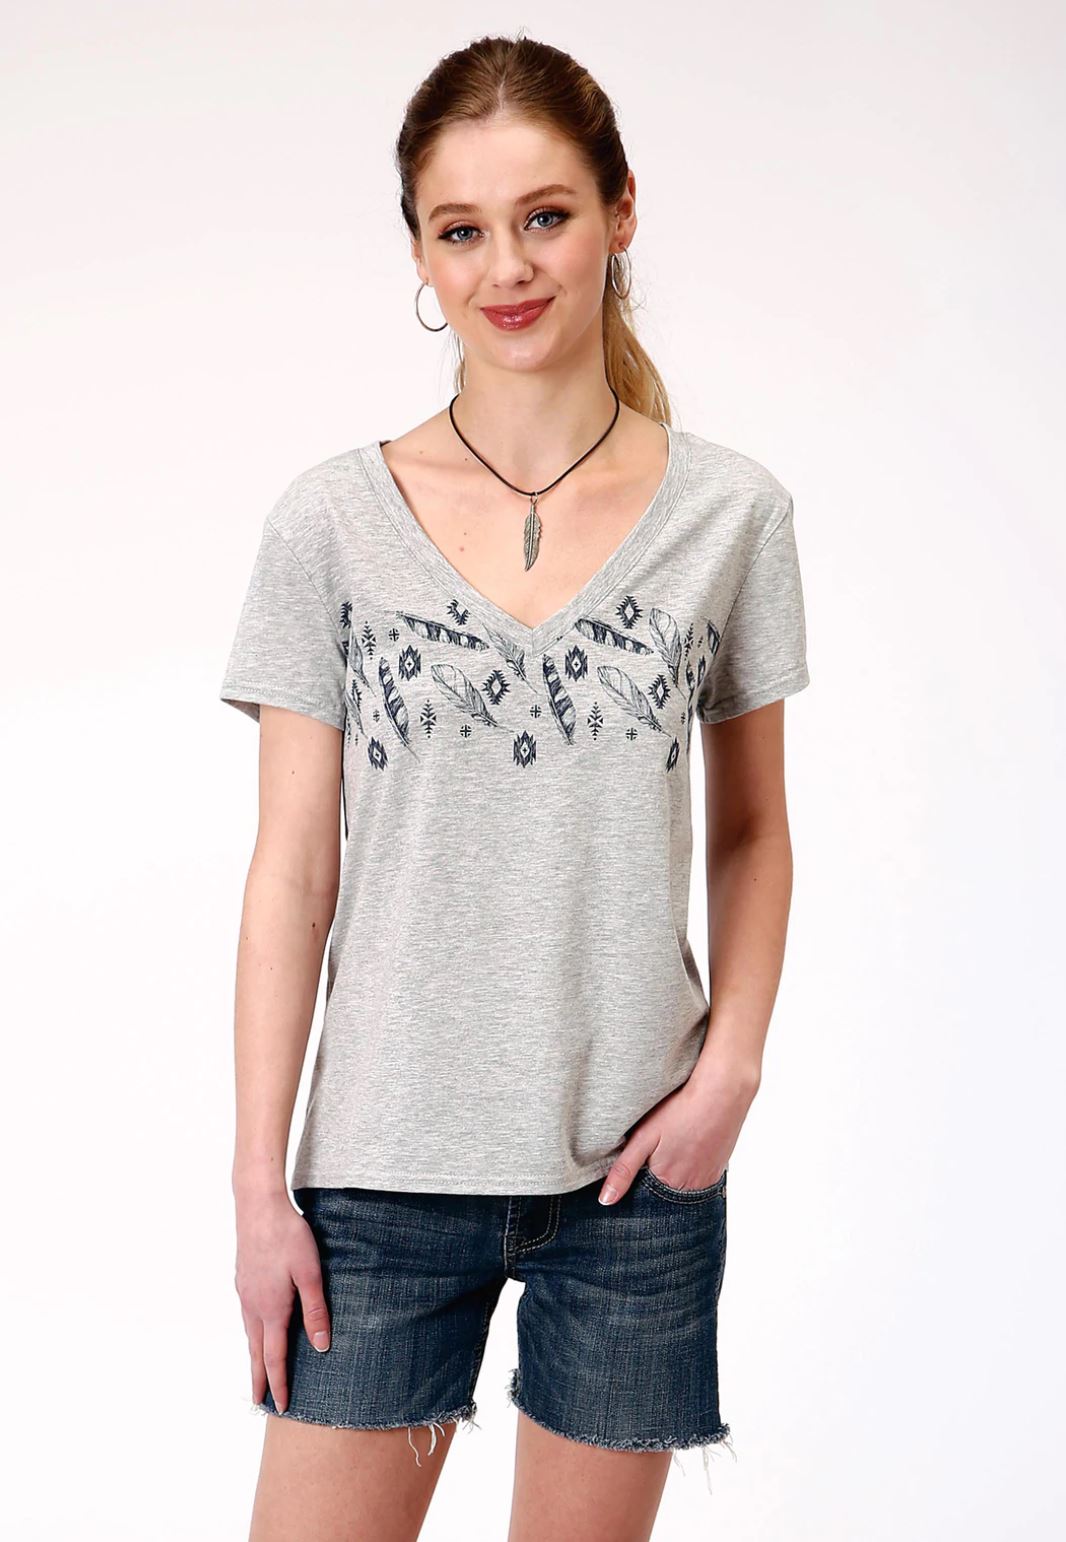 3-39-513-2068 Roper Women's Five Star Collection Tee Solid Grey